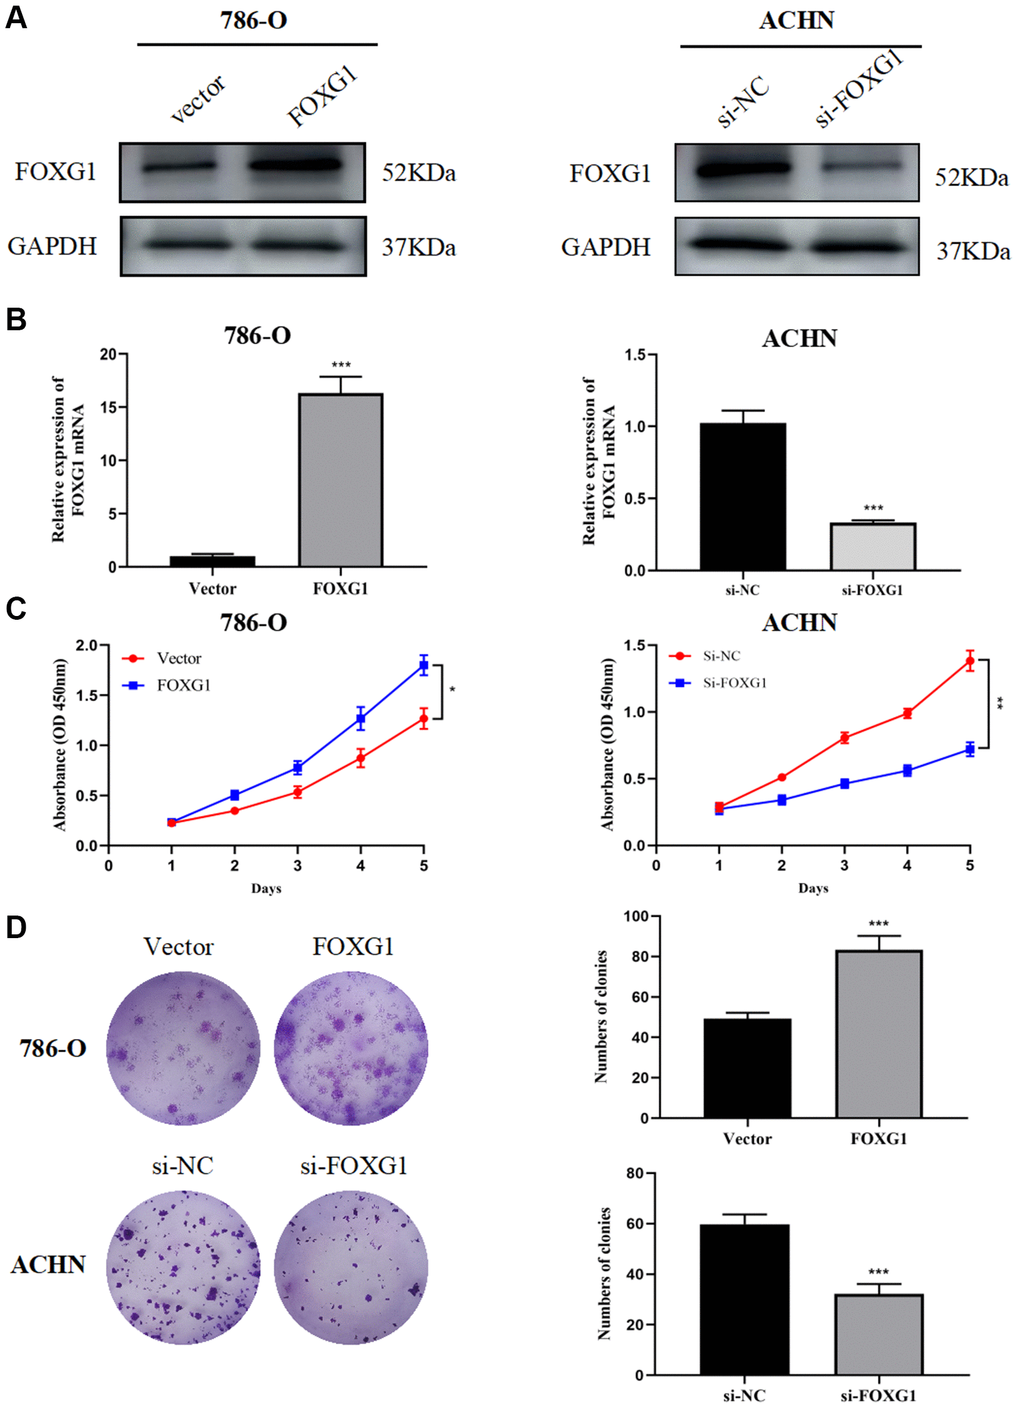 FOXG1 promotes proliferation of RCC cell lines. The efficiency of FOXG1 overexpression and knockdown was evaluated by western blot (A) and qRT-PCR (B) analyses. (C) Results of the CCK-8 assay on 786-O and ACHN cells following FOXG1 overexpression or silencing. (D) Results of colony formation assays on 786-O and ACHN cells after FOXG1 was overexpressed or knocked down. The data are presented as the mean ± standard deviation (SD) of experiments performed in triplicate. *p **p ***p 